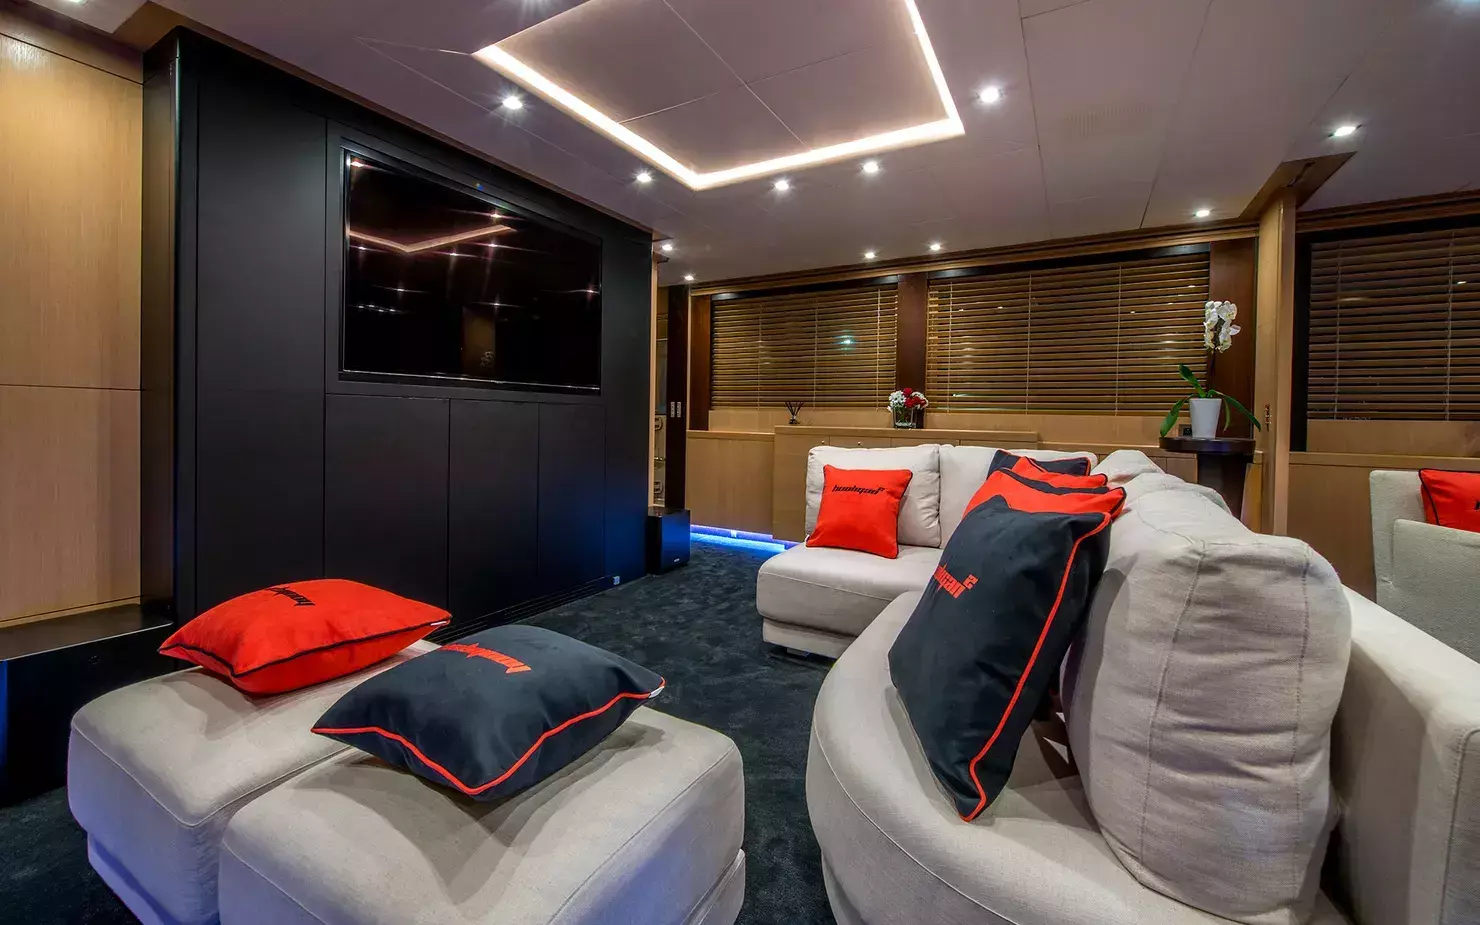 Hooligan II by ISA - Special Offer for a private Superyacht Charter in St Tropez with a crew